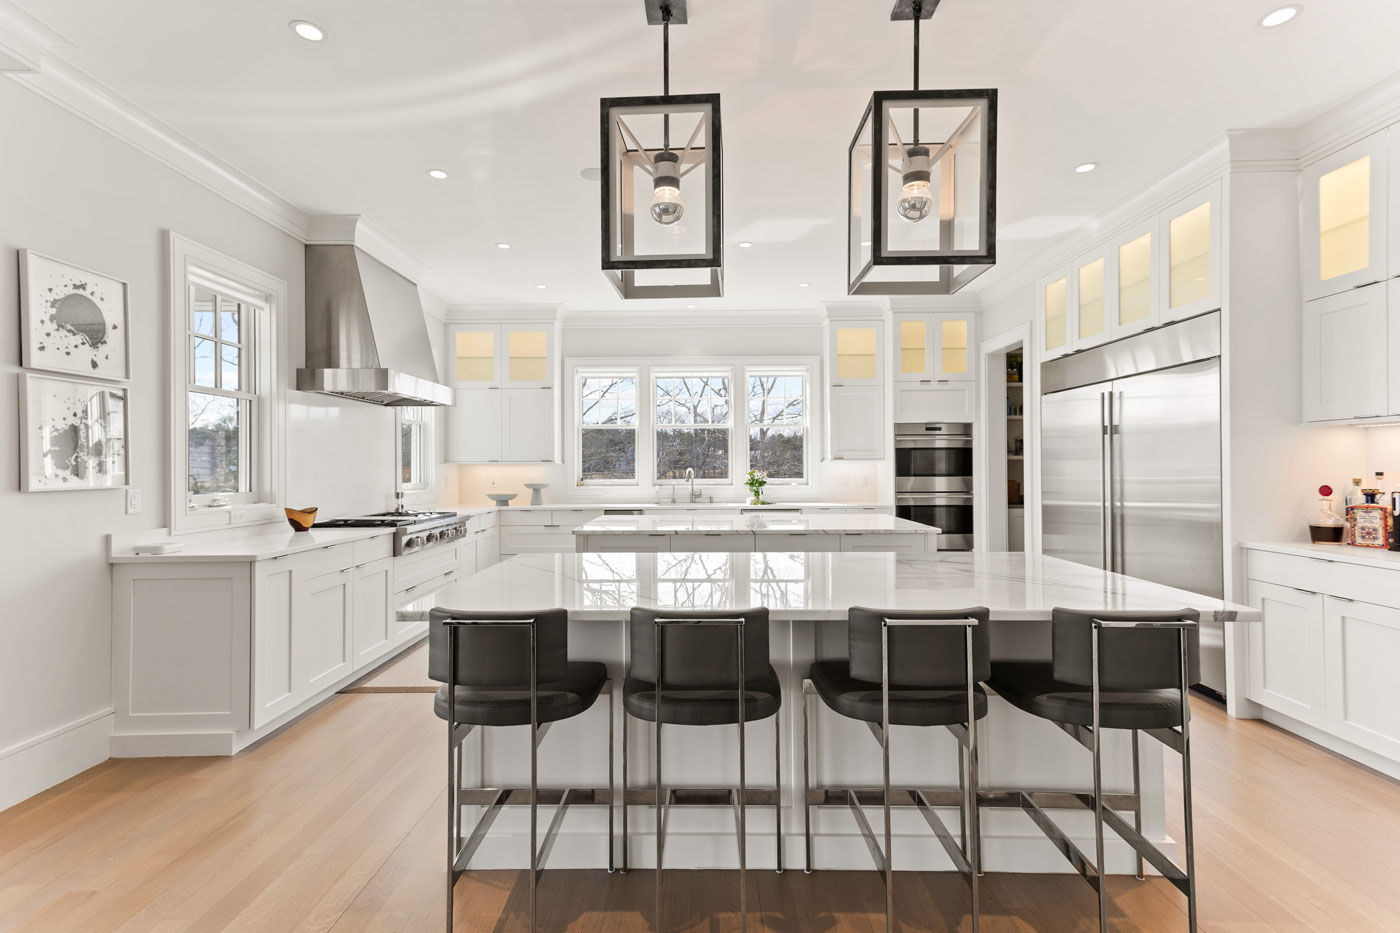 modern white kitchen with 2 big stone islands in the center